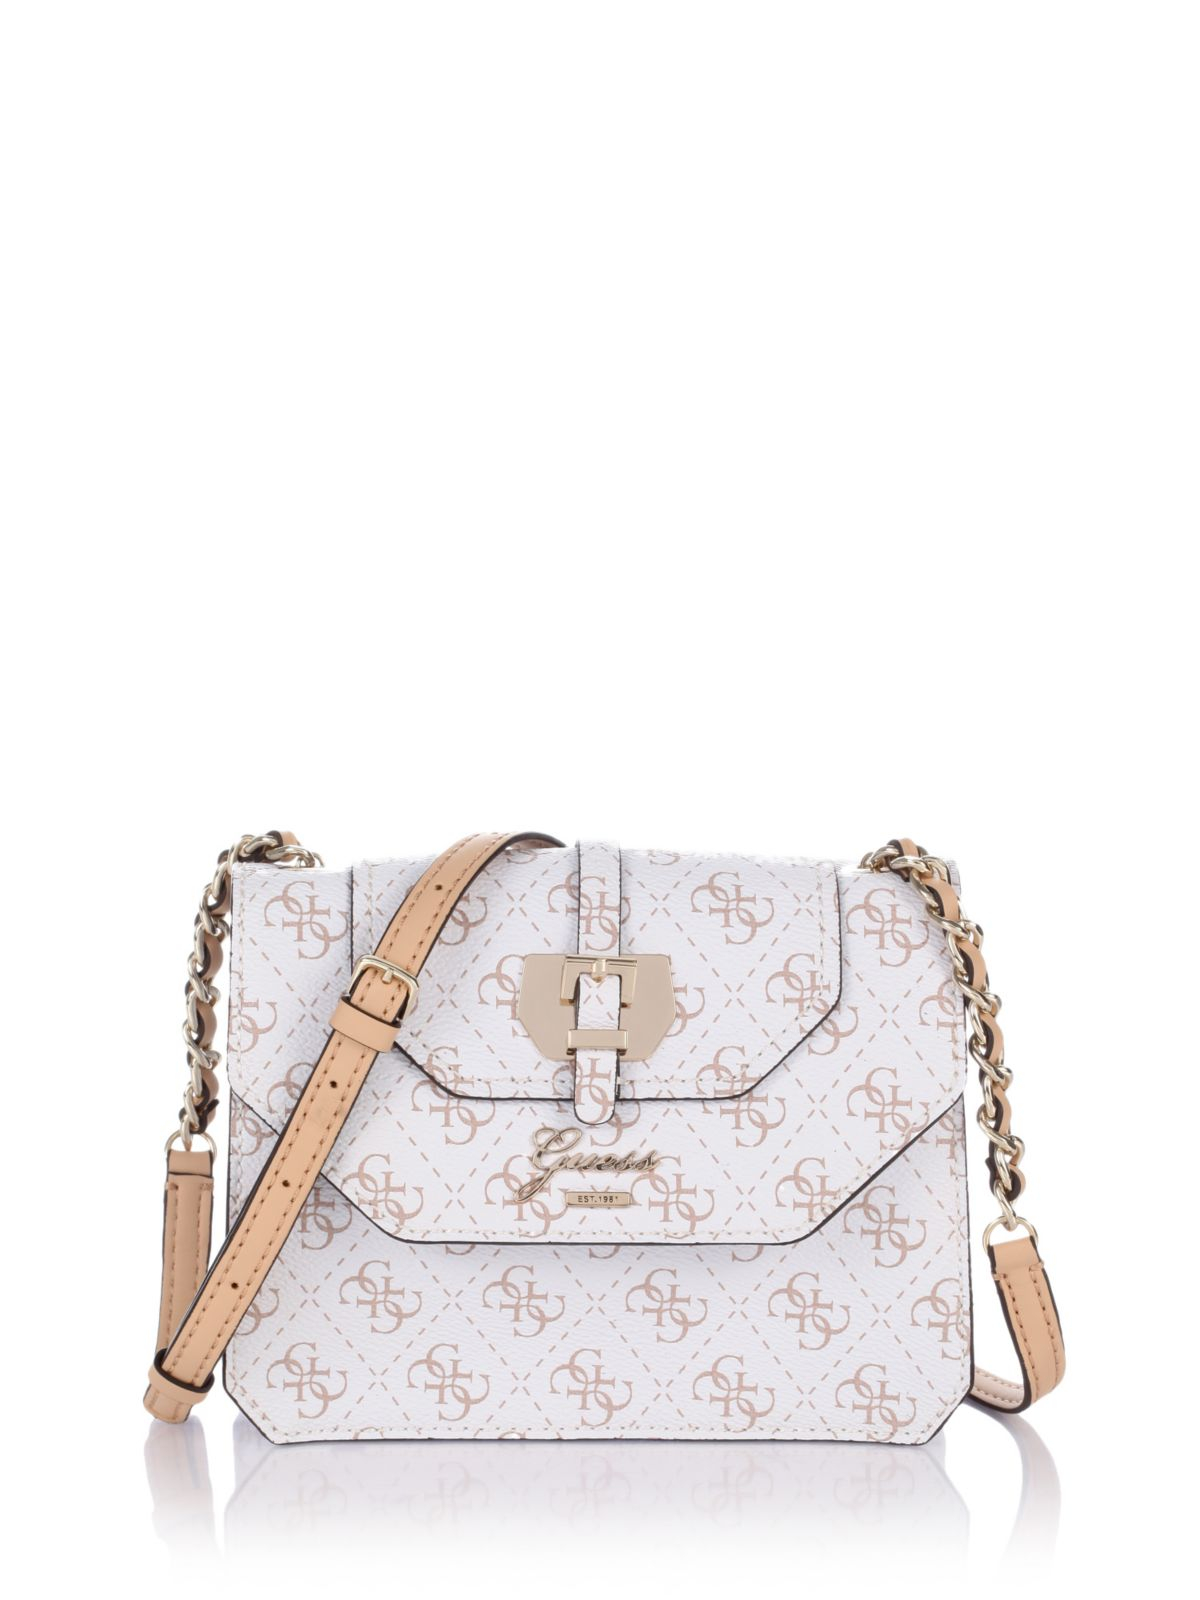 Guess Confidential Logo Petite Crossbody Flap Bag in White | Lyst